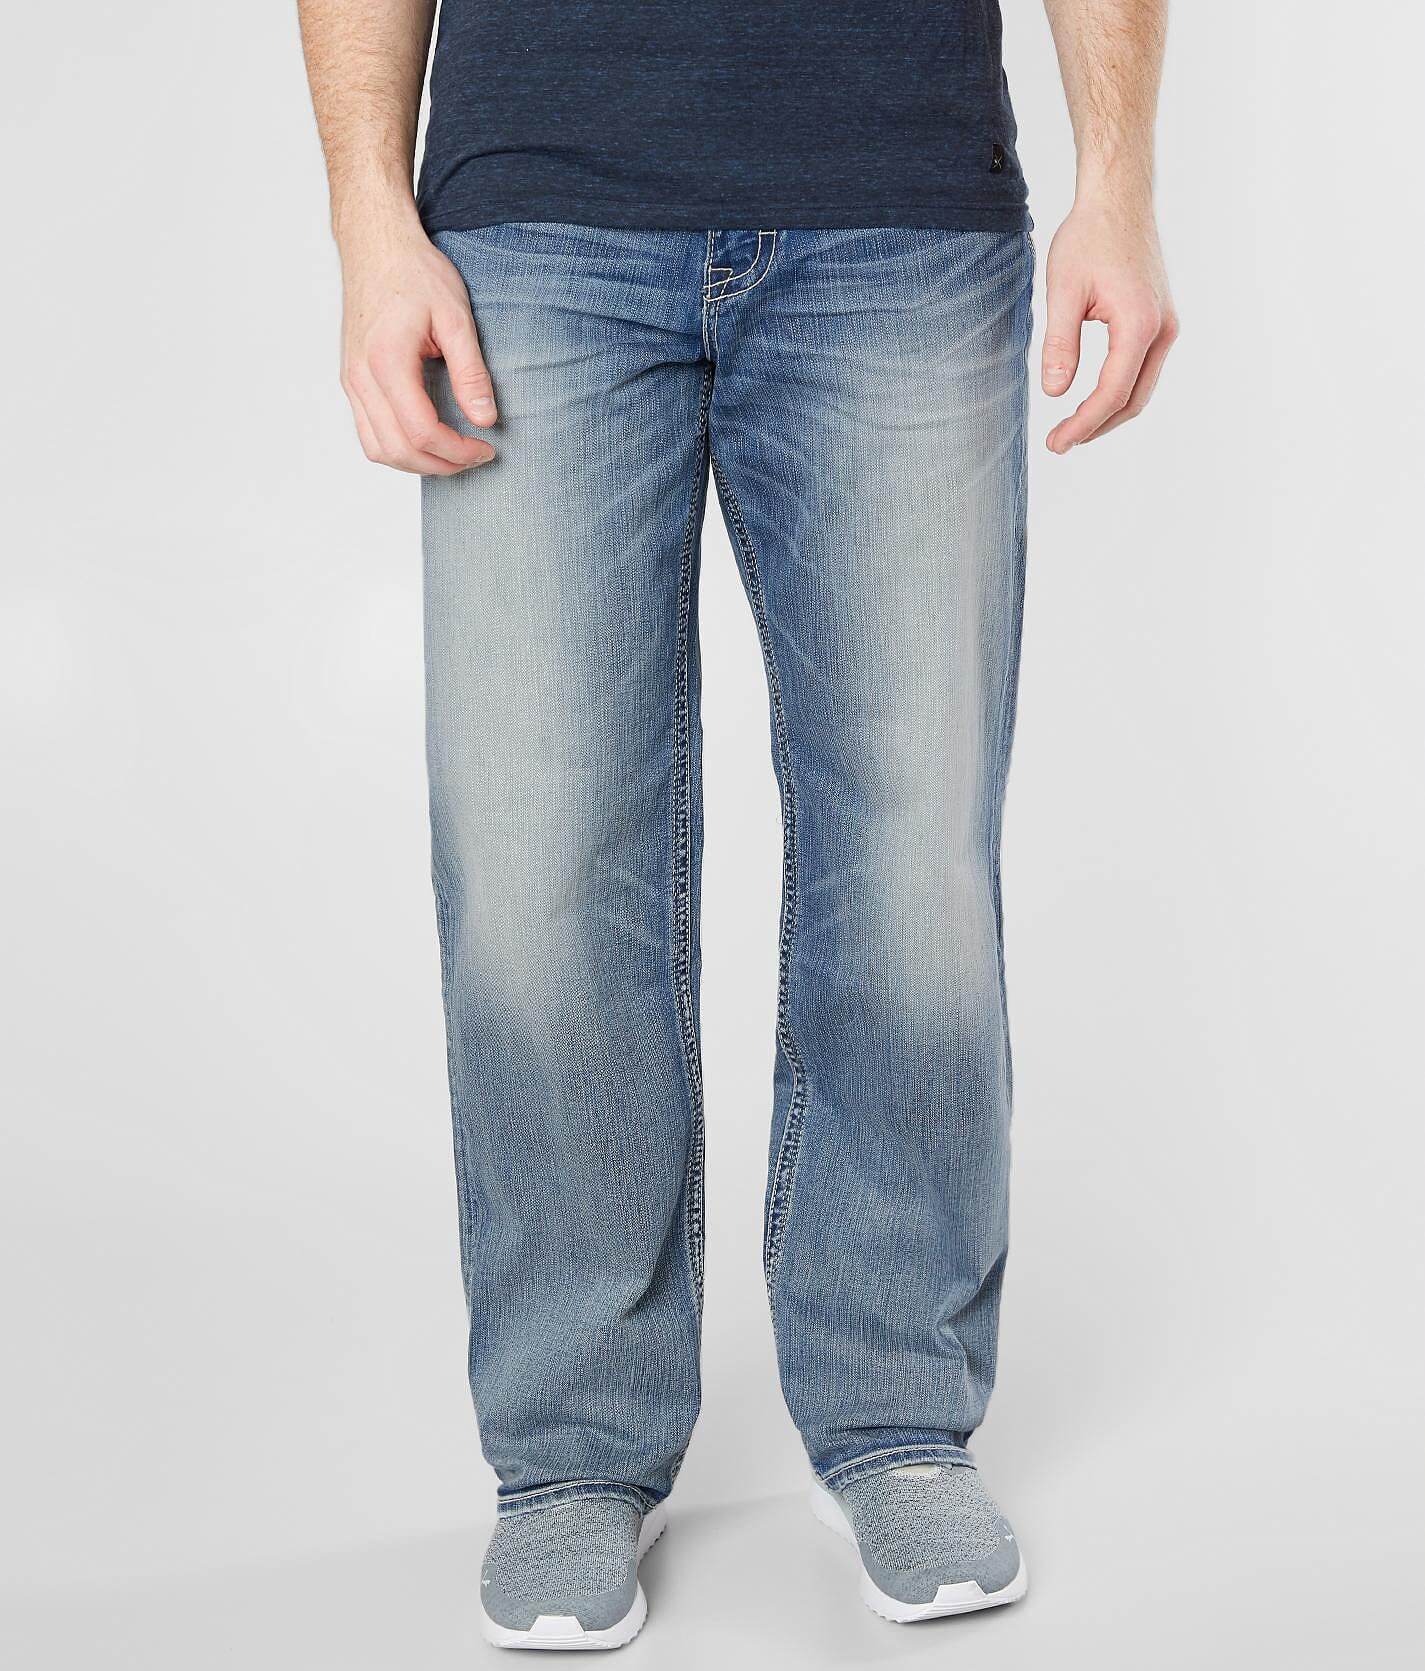 buckle seth jeans